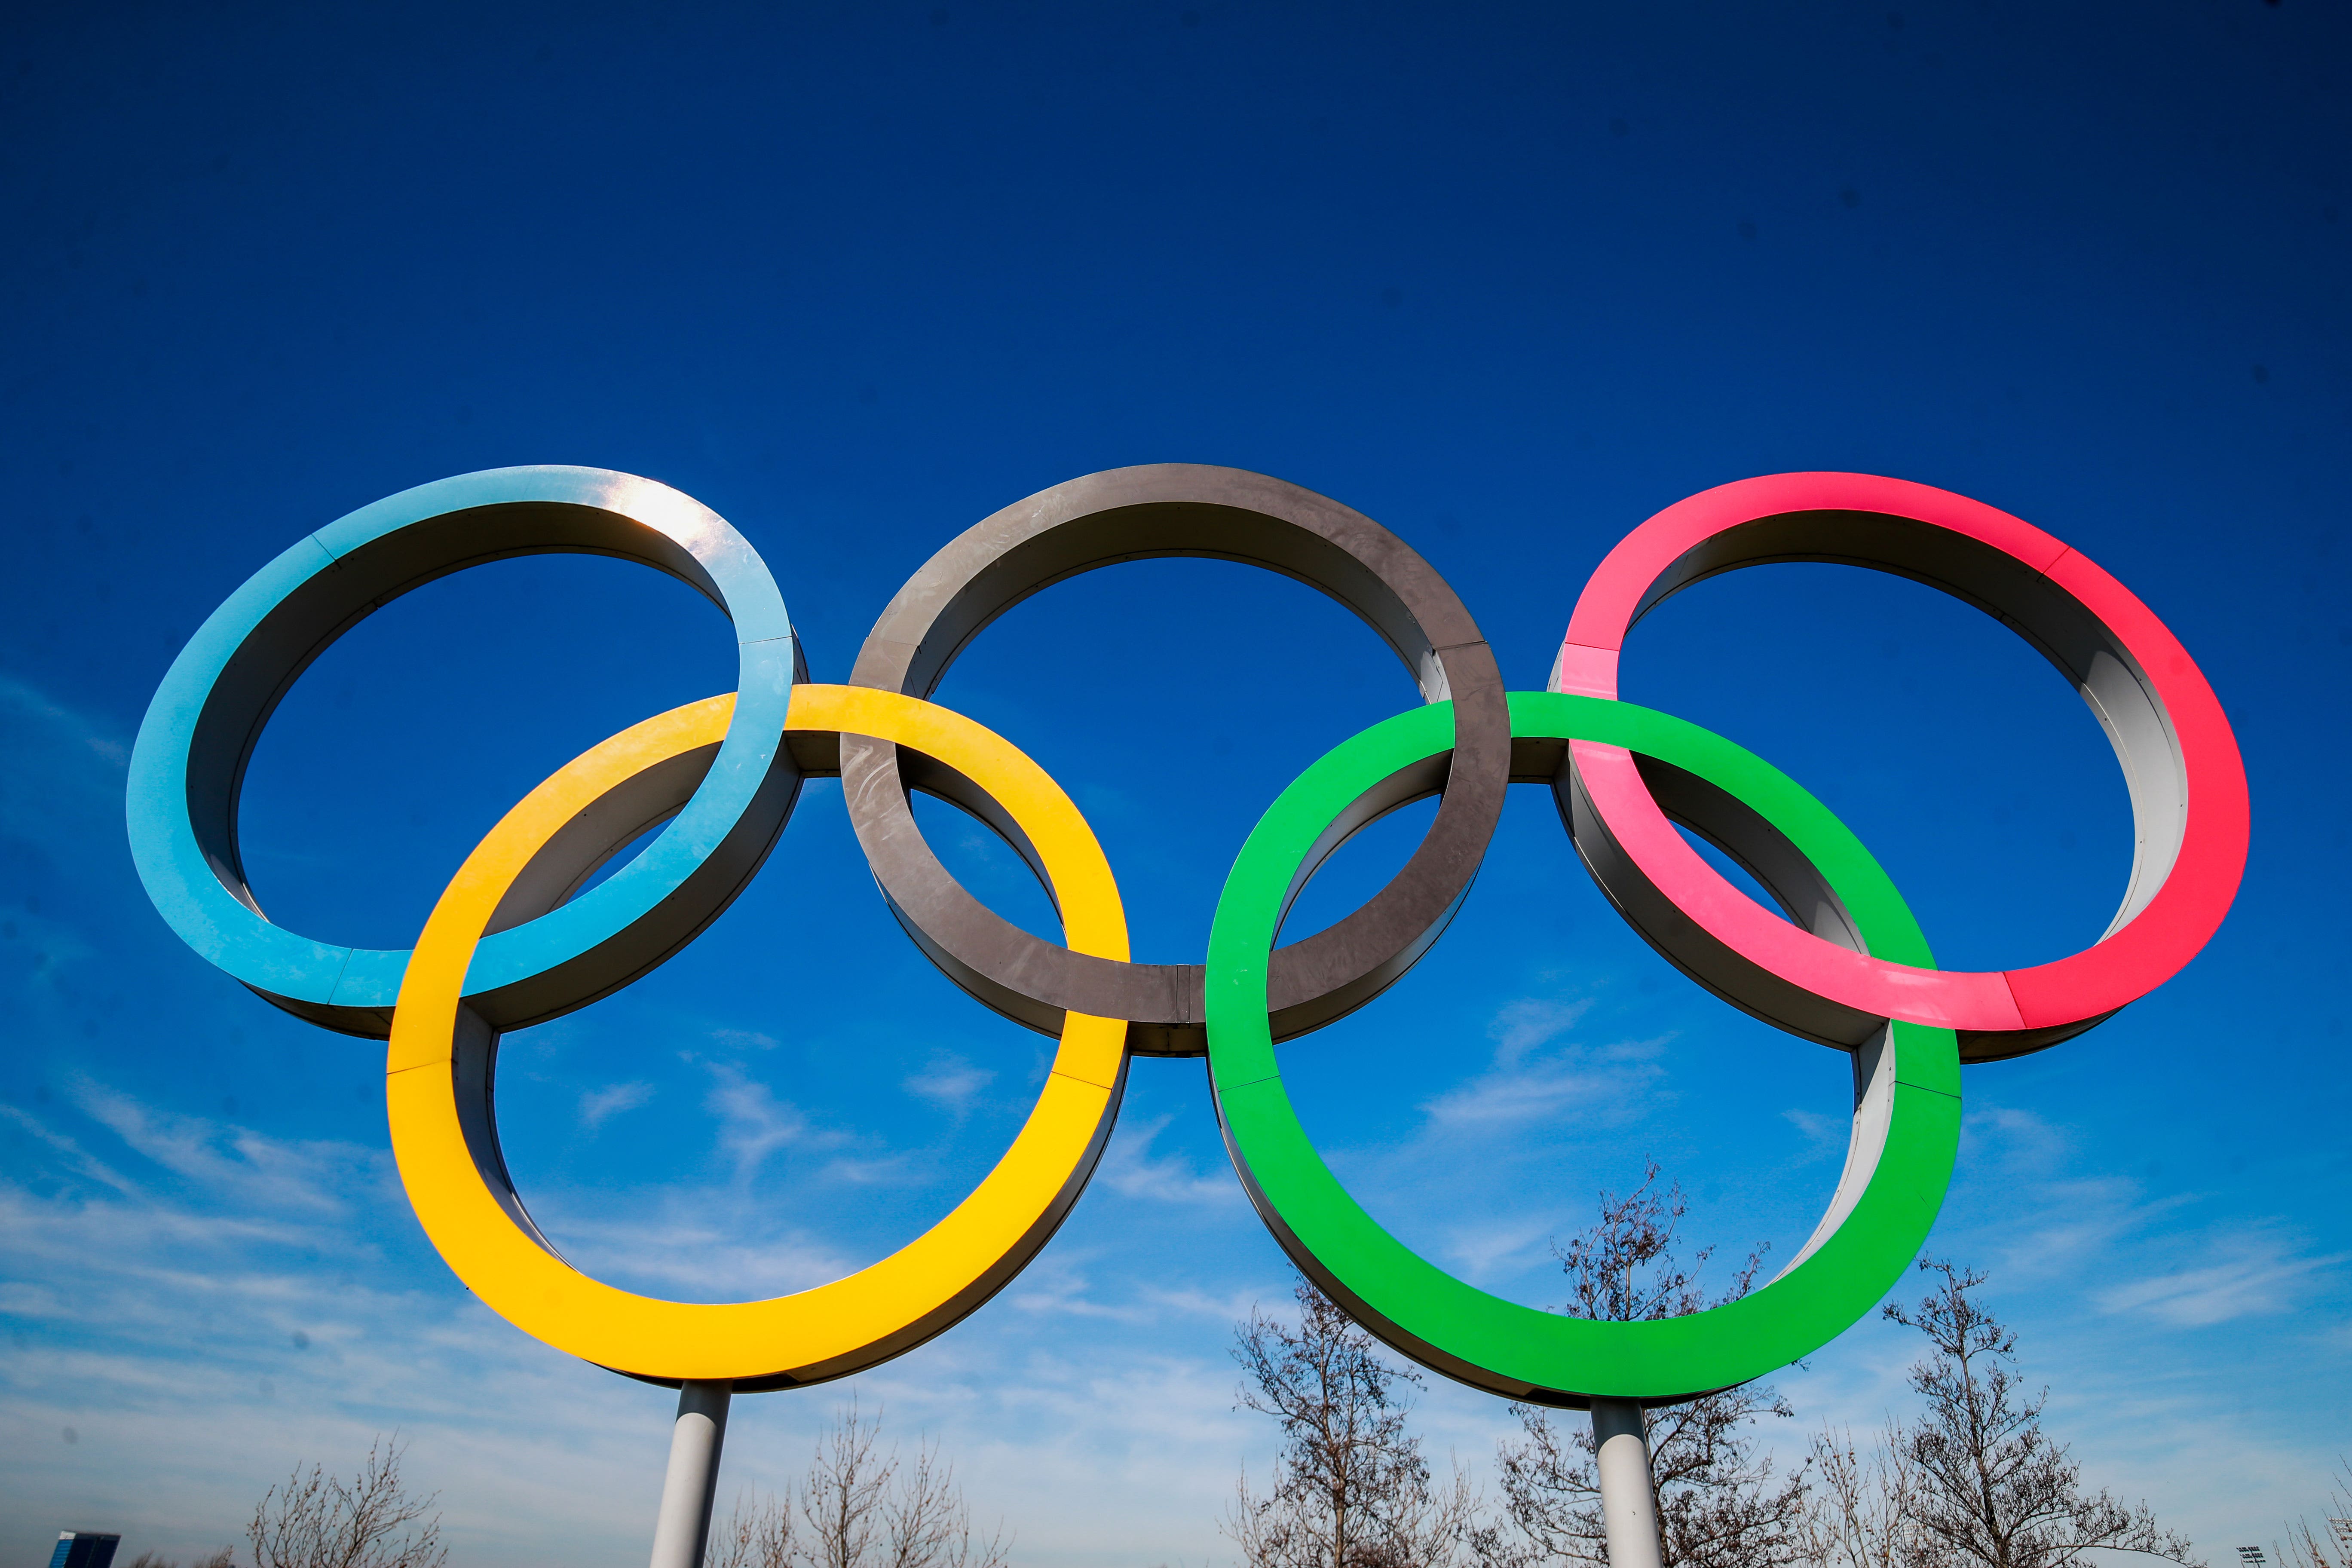 LA Olympic Games gets green light for five sports entering in 2028